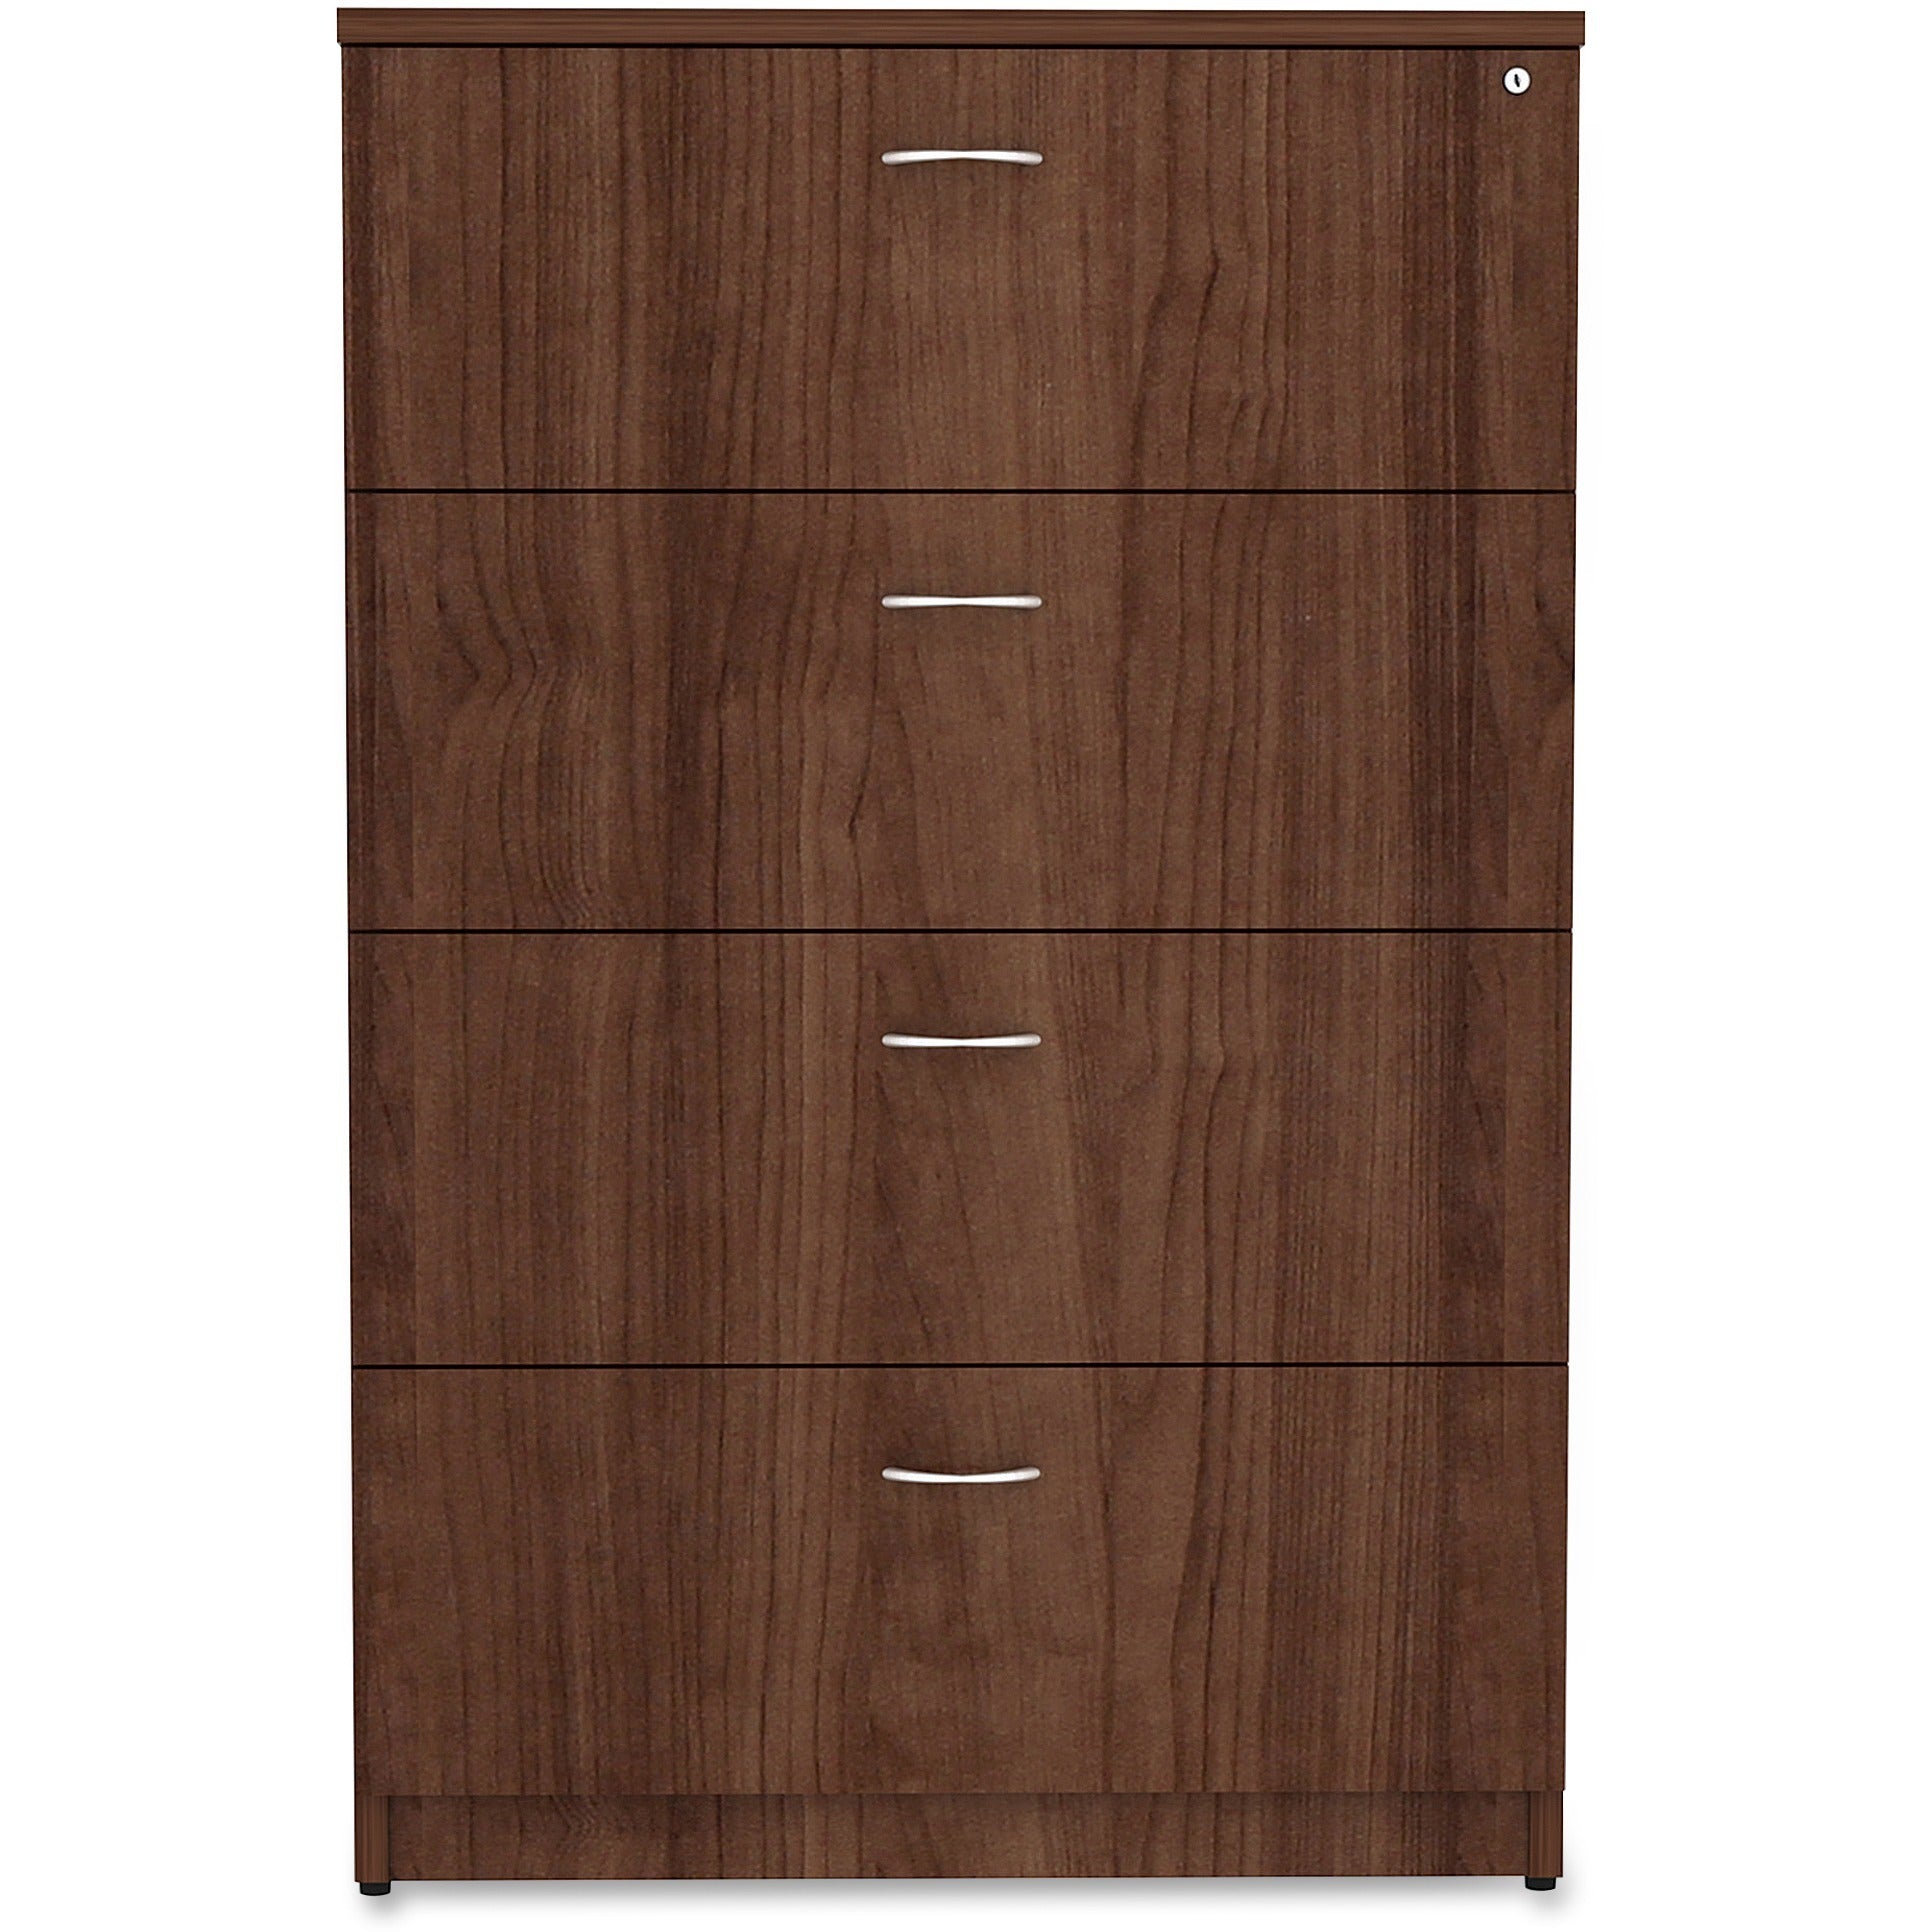 lorell-essentials-series-4-drawer-lateral-file-1-top-355-x-22548-4-x-file-drawers-finish-walnut-laminate_llr34388 - 2